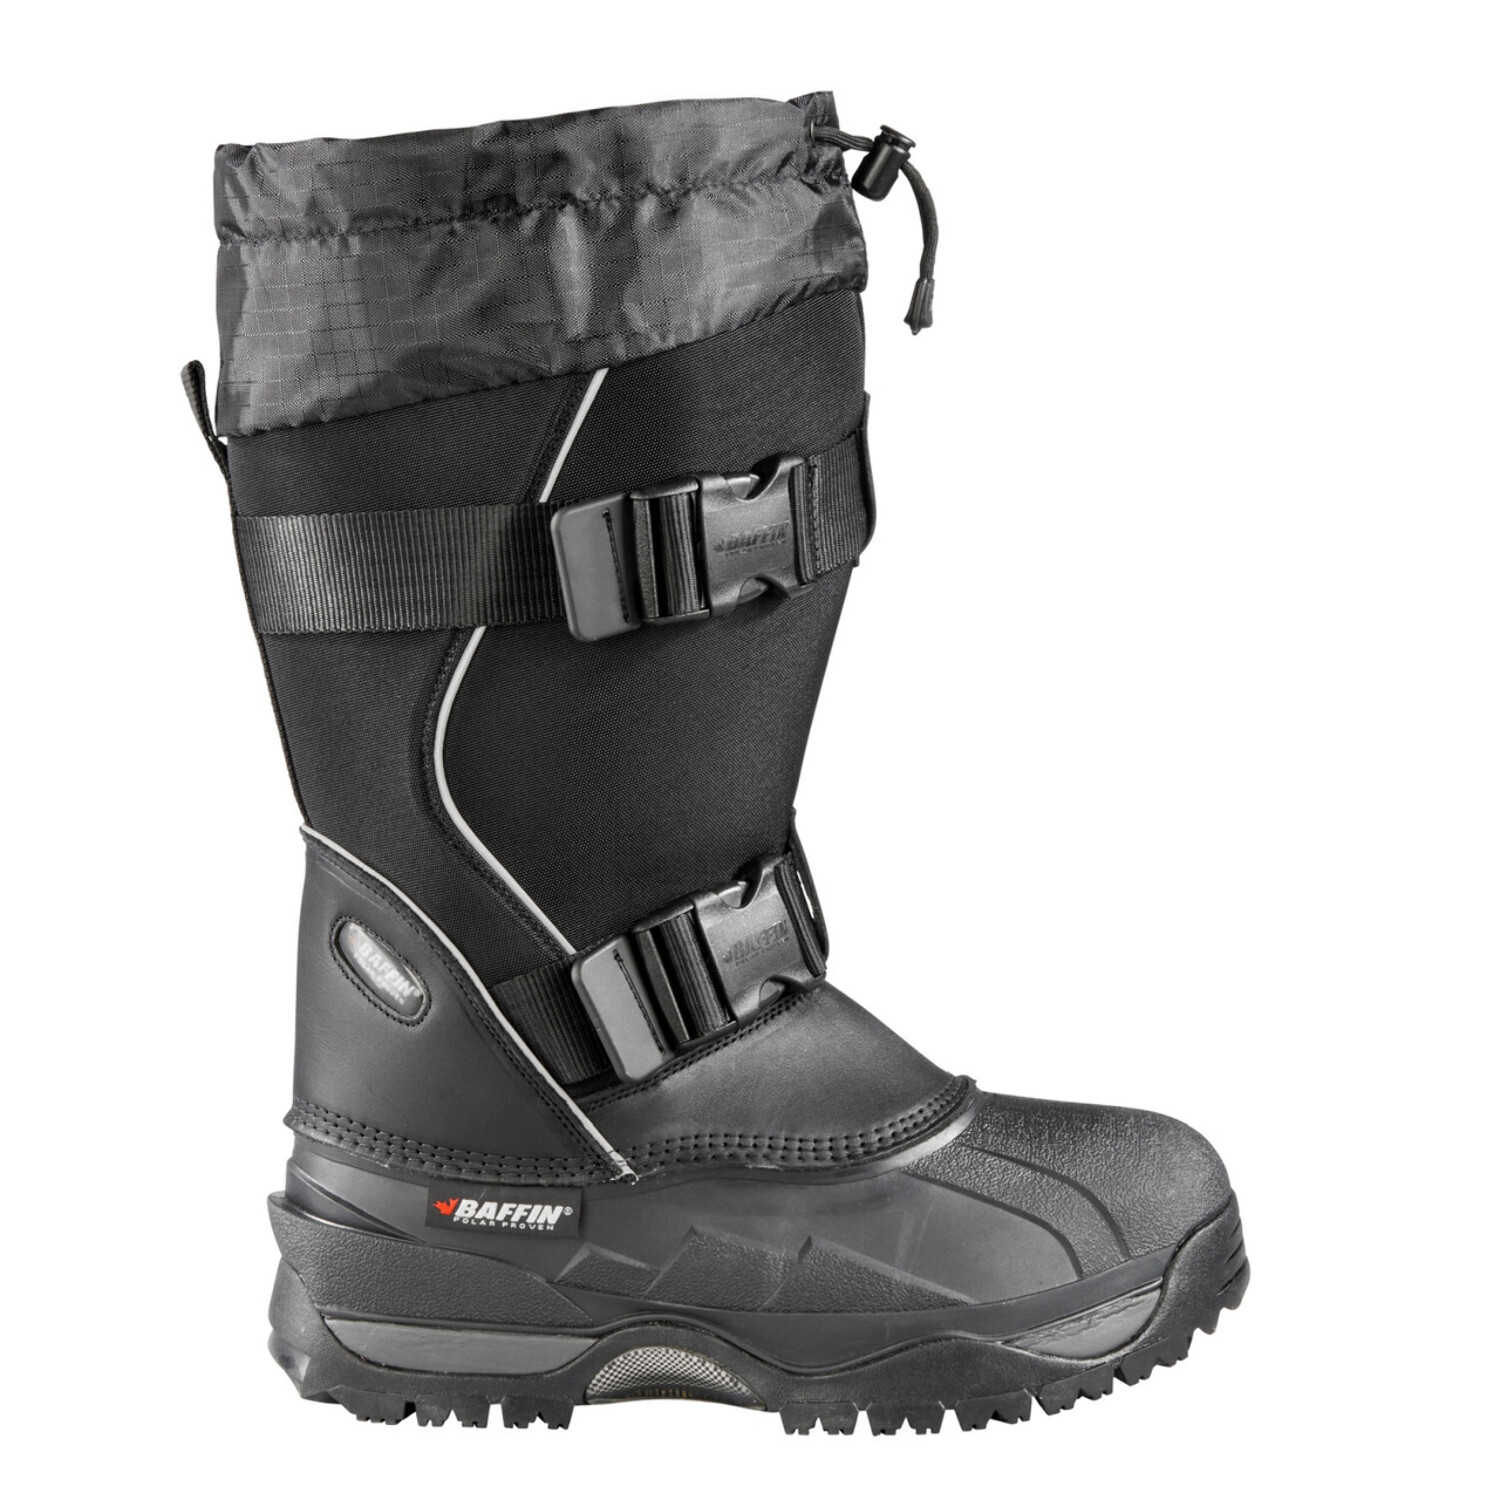 Baffin Impact Insulated Snow Boot - Men's - image 4 of 5